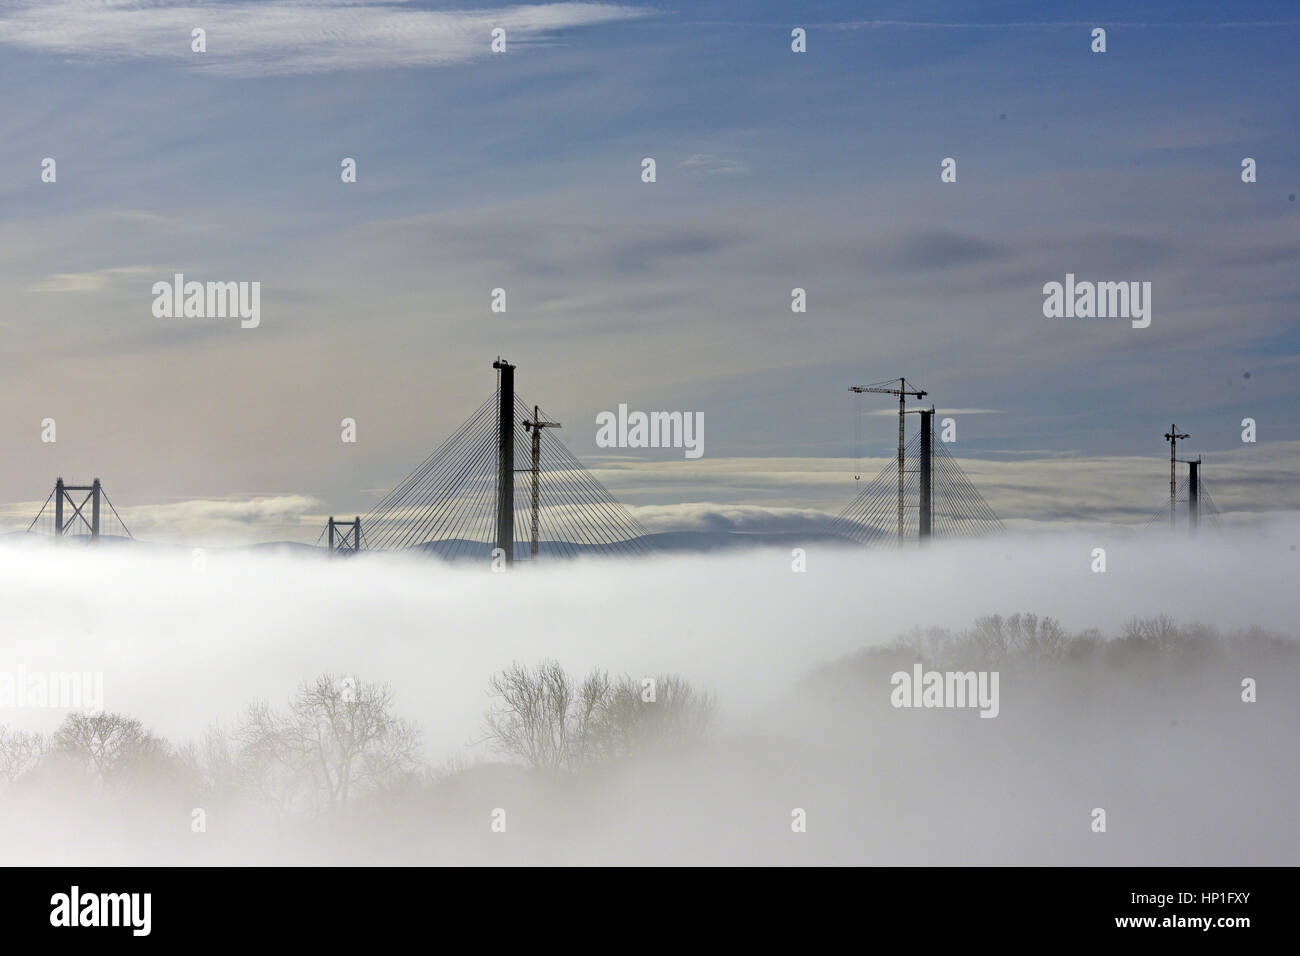 Inverkeithing, Scotland, UK. 17th February, 2017. The towers of the new Queensferry Crossing bridge across the Forth Estuary rise out of the morning mist, with the towers of the existing road bridge in the background, Credit: Ken Jack/Alamy Live News Stock Photo